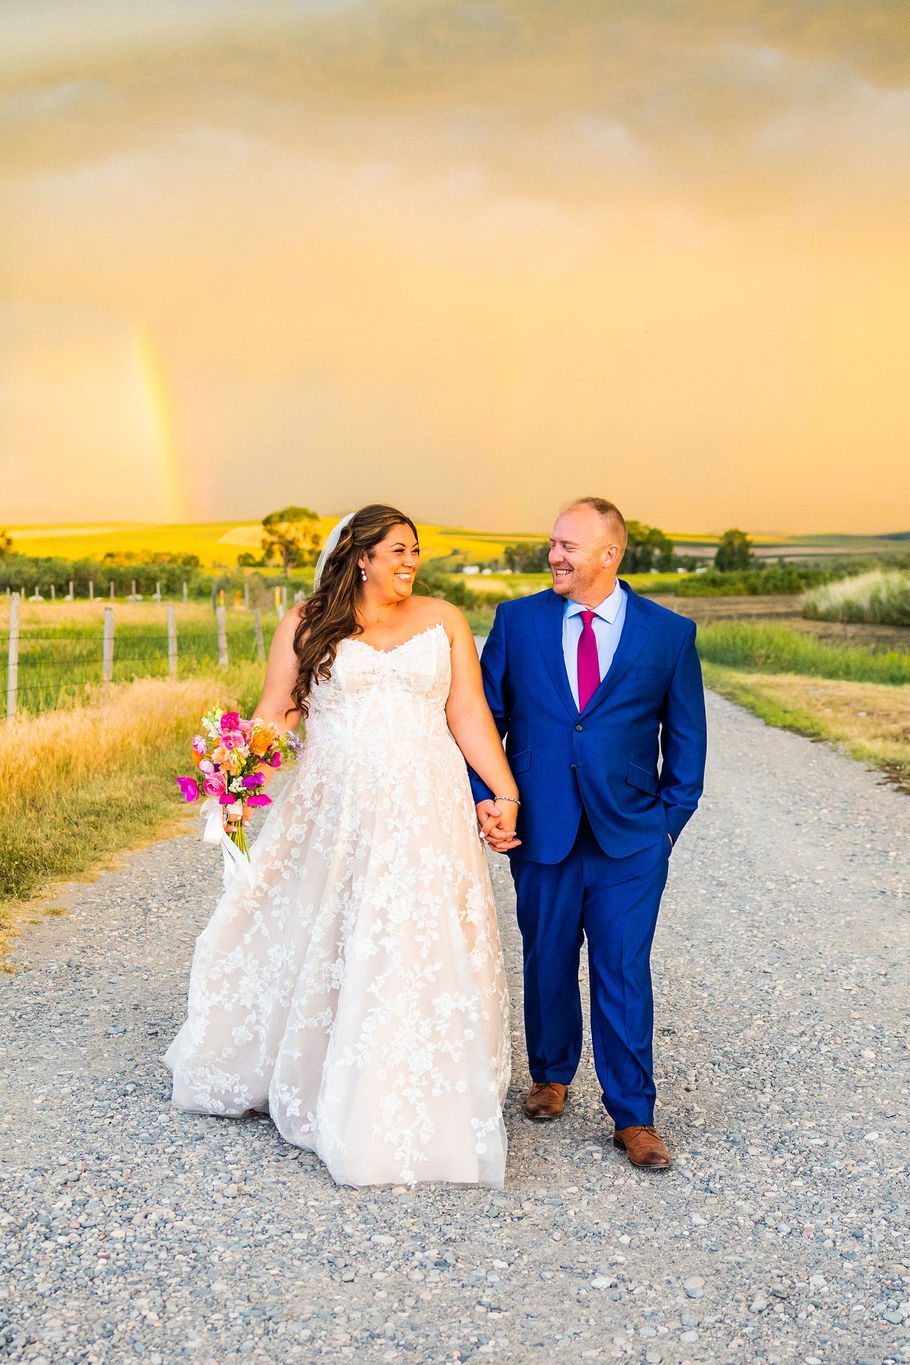 Montana wedding with couple on dirt road